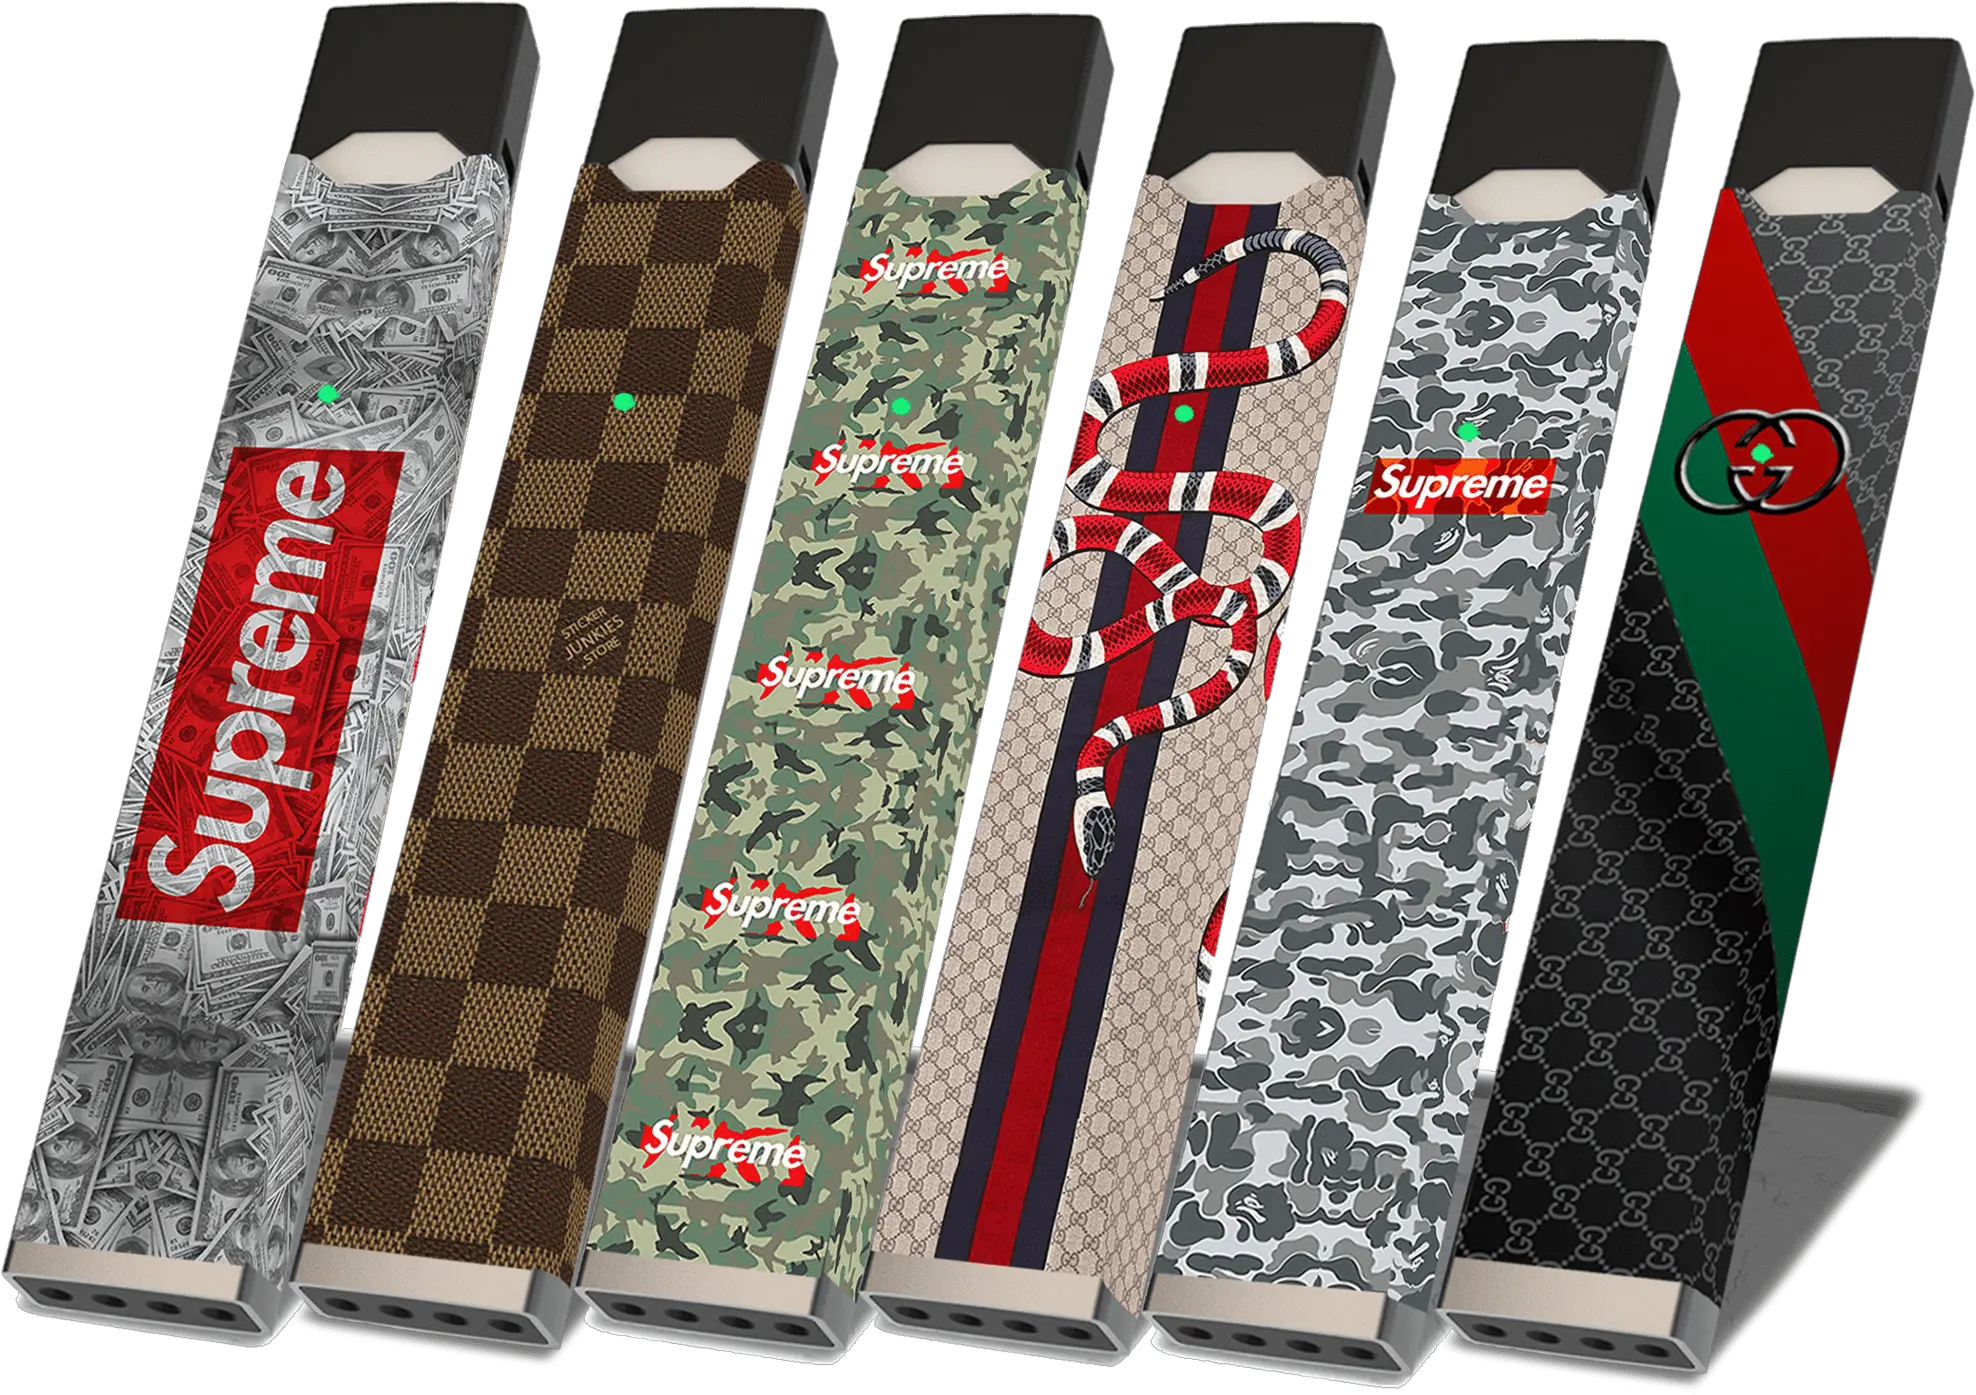 Download Hd Fashion Juul Bundle Gucci Web And Kingsnake Gucci Juul Png Juul Transparent